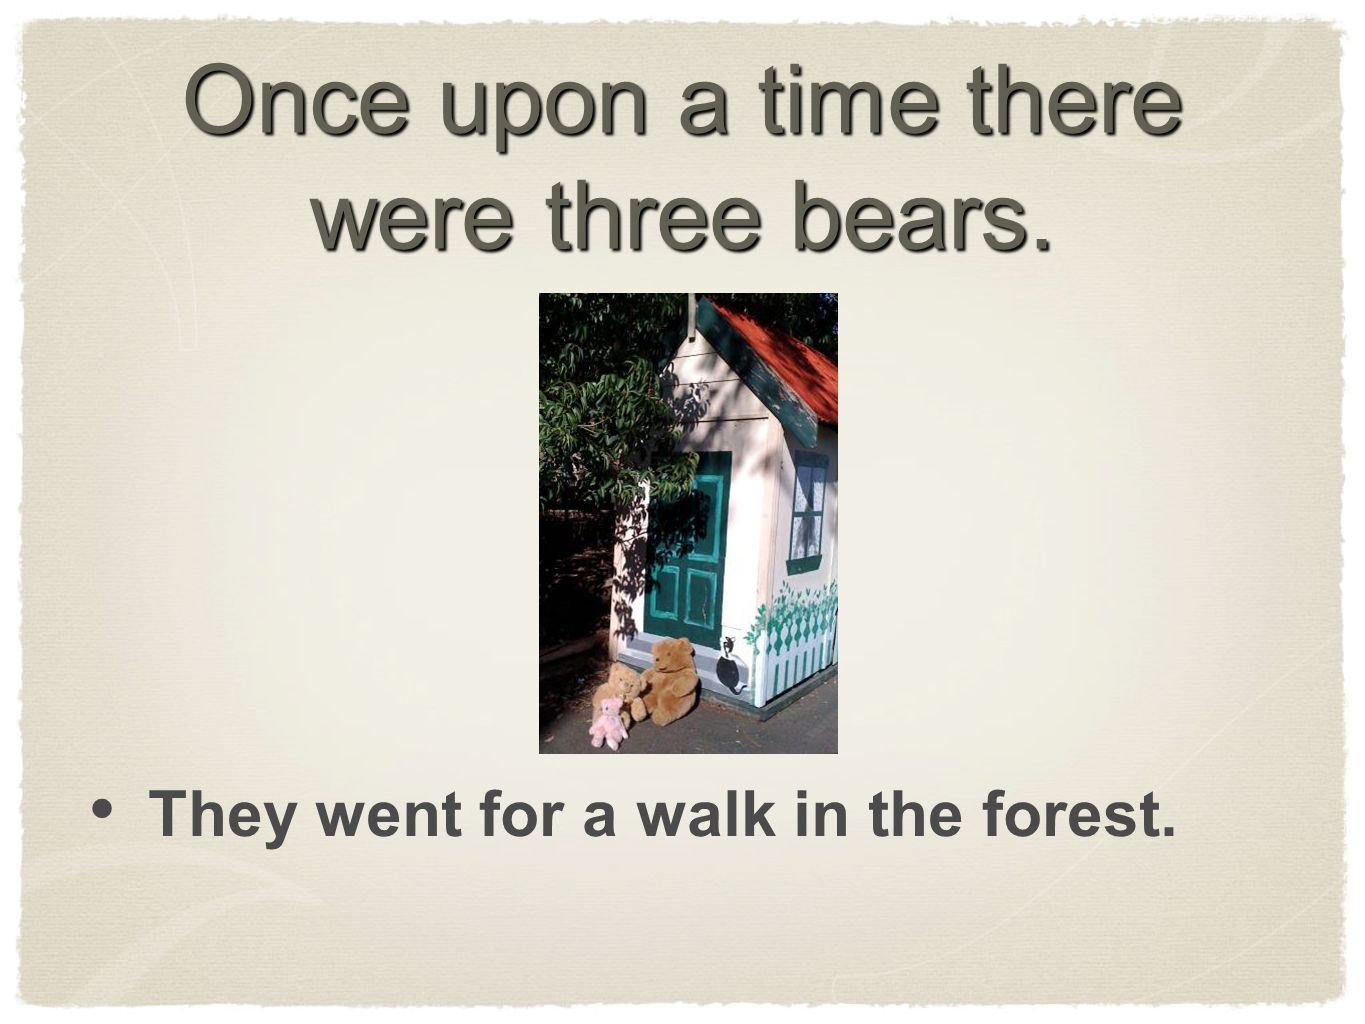 Once upon a time there were three bears. They went for a walk in the forest.